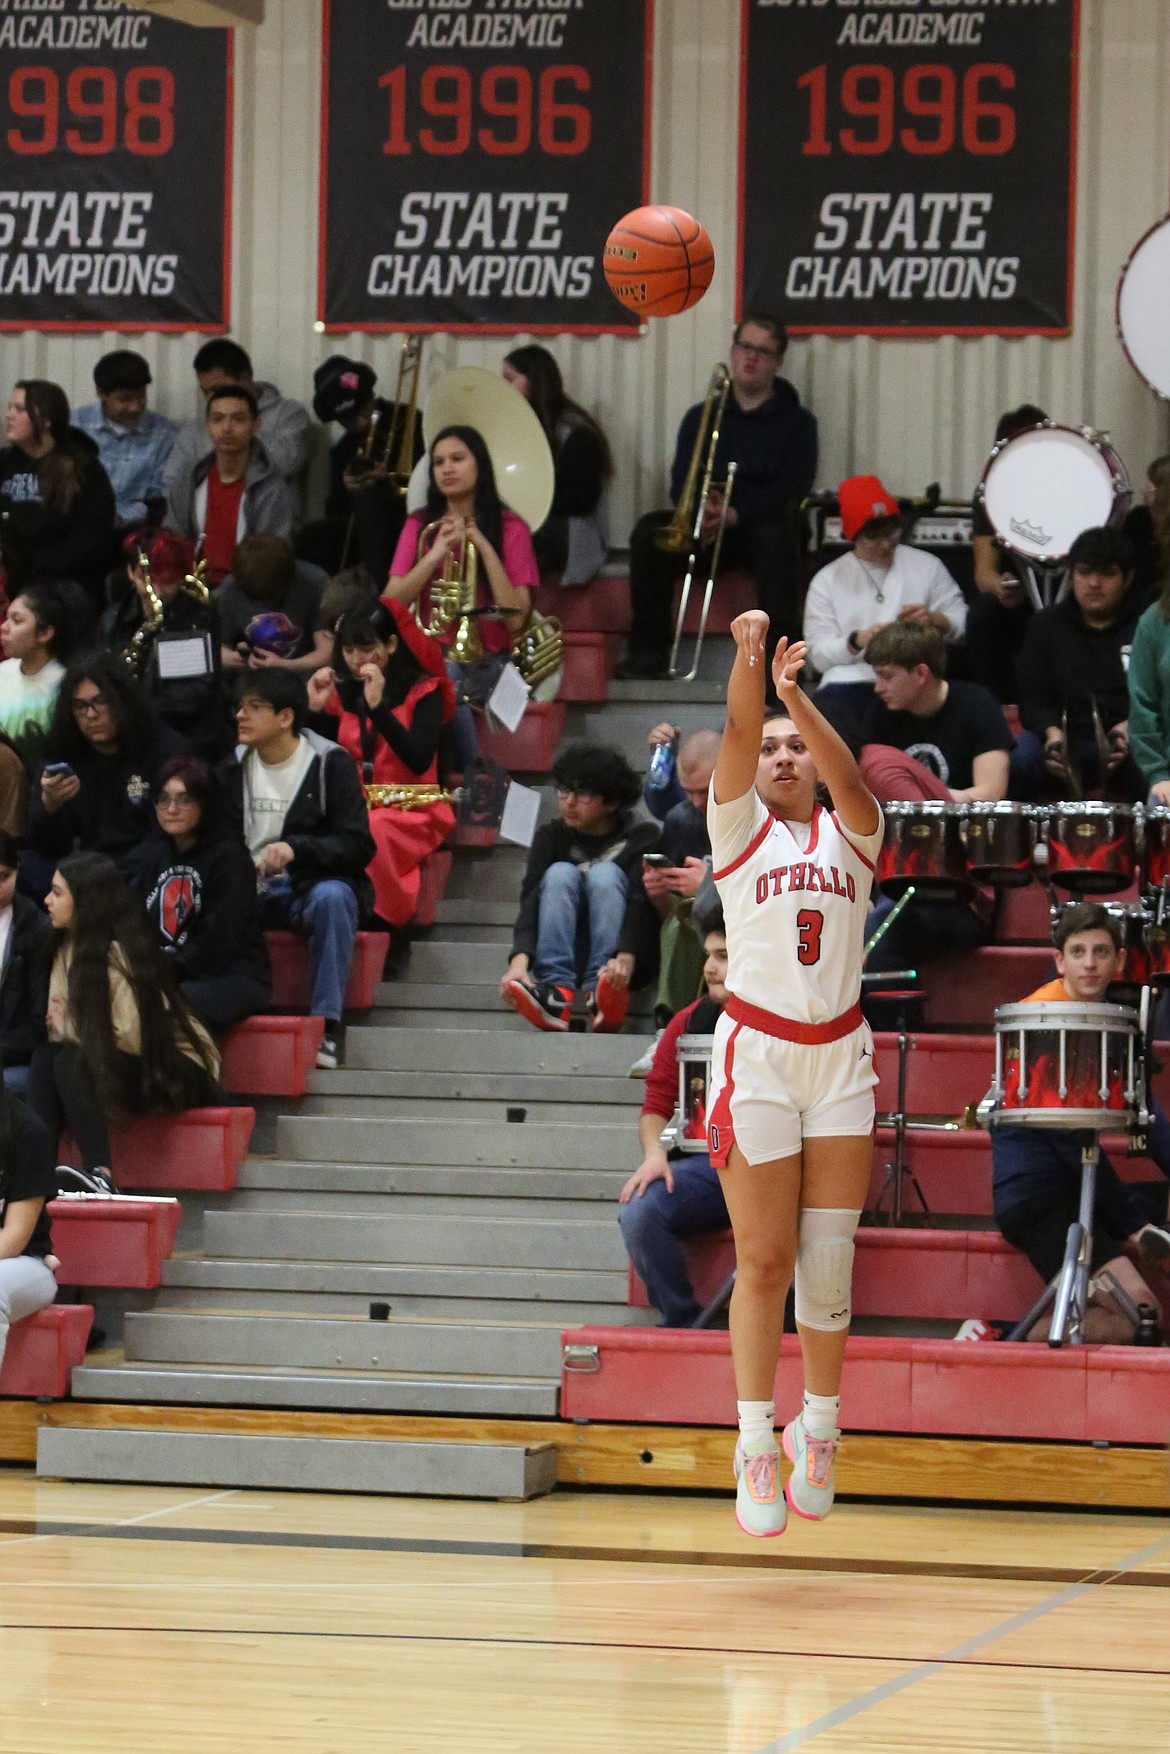 Othello senior Briana Andrade (3) lines up a shot from three in the second quarter against East Valley (Yakima). Andrade’s shot was good, giving her 1,000 career points.